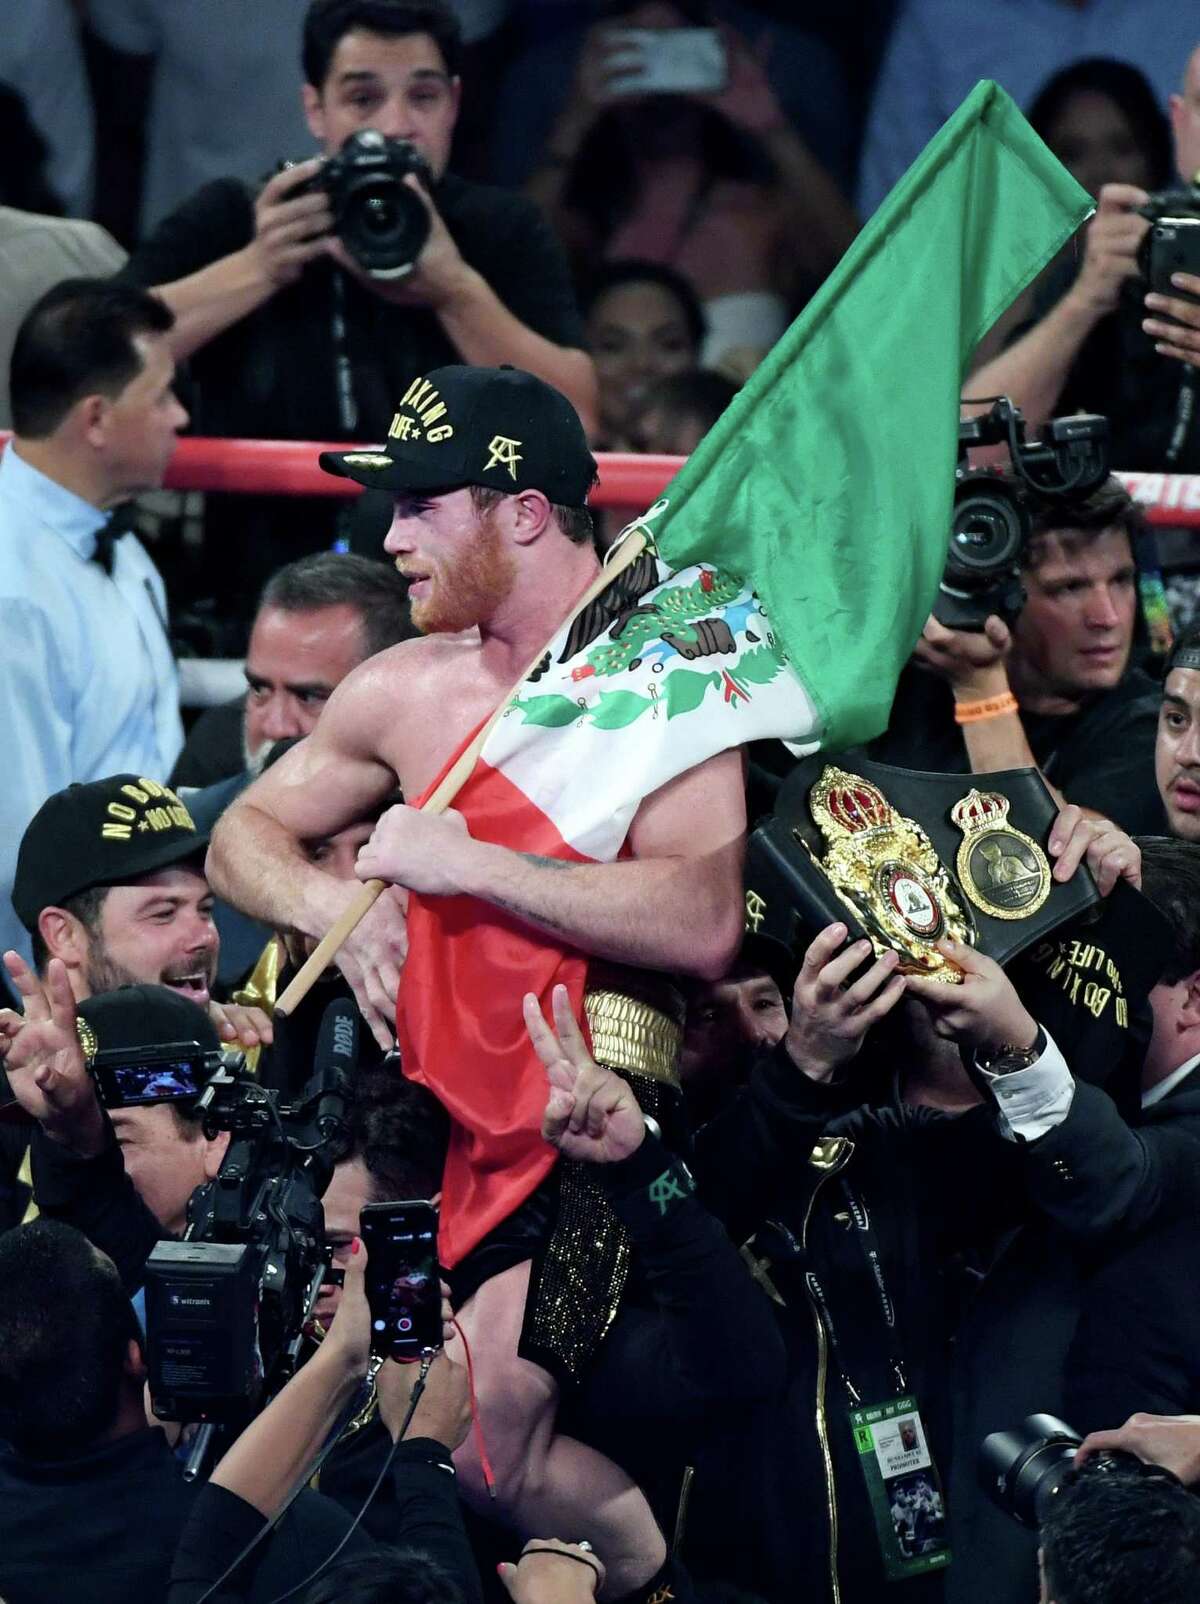 LAS VEGAS, NV - SEPTEMBER 15: Canelo Alvarez holds a Mexican flag as he celebrates his majority-decision win over Gennady Golovkin after their WBC/WBA middleweight title fight at T-Mobile Arena on September 15, 2018 in Las Vegas, Nevada. (Photo by Ethan Miller/Getty Images)